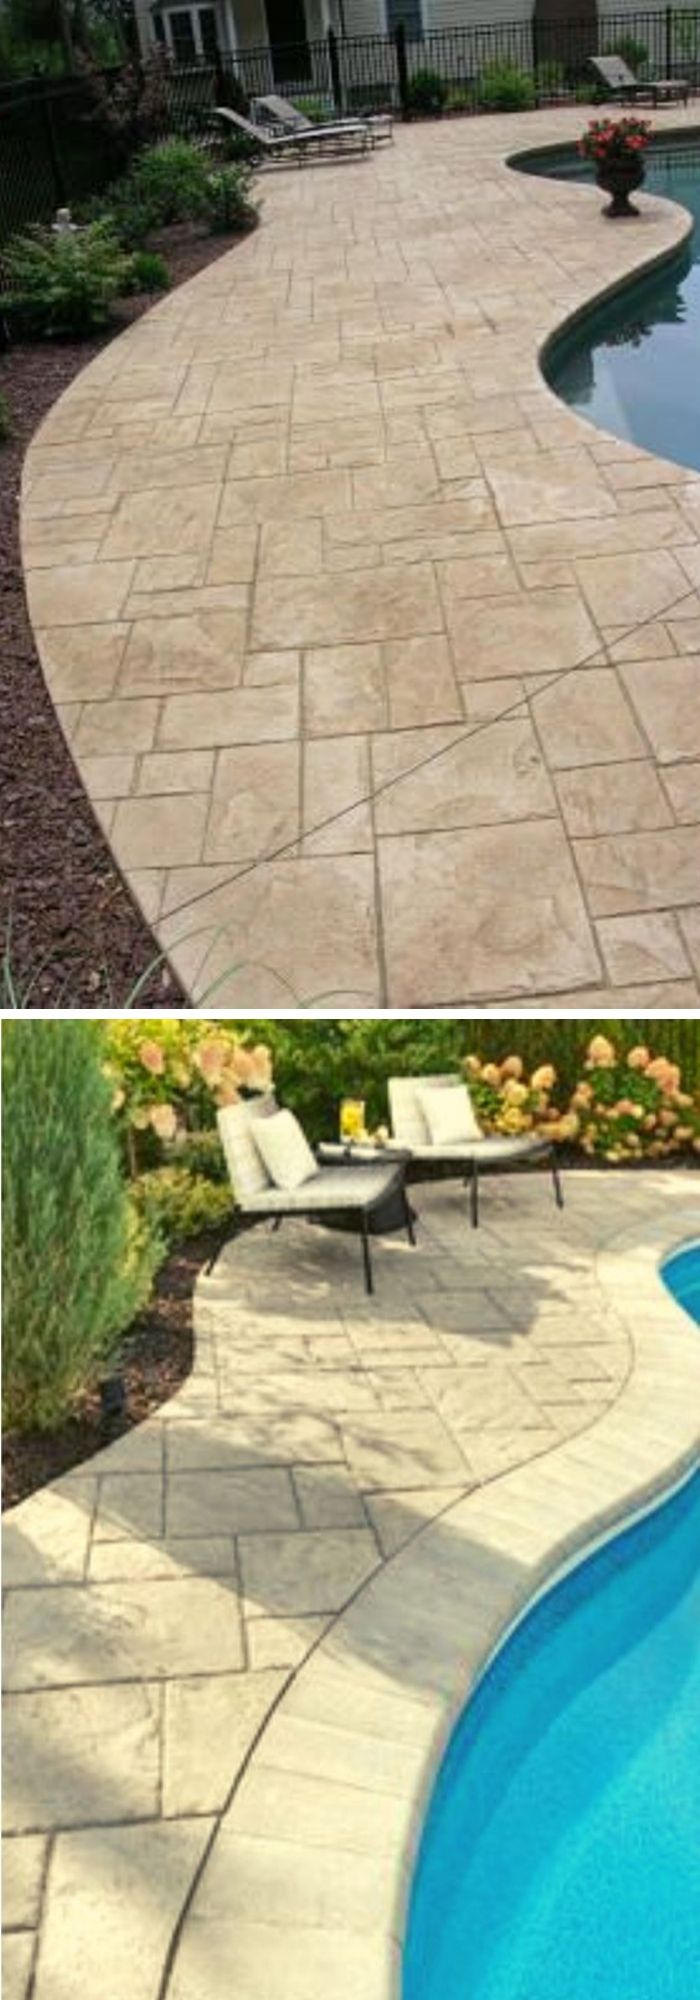 Stamped concrete patio with pool